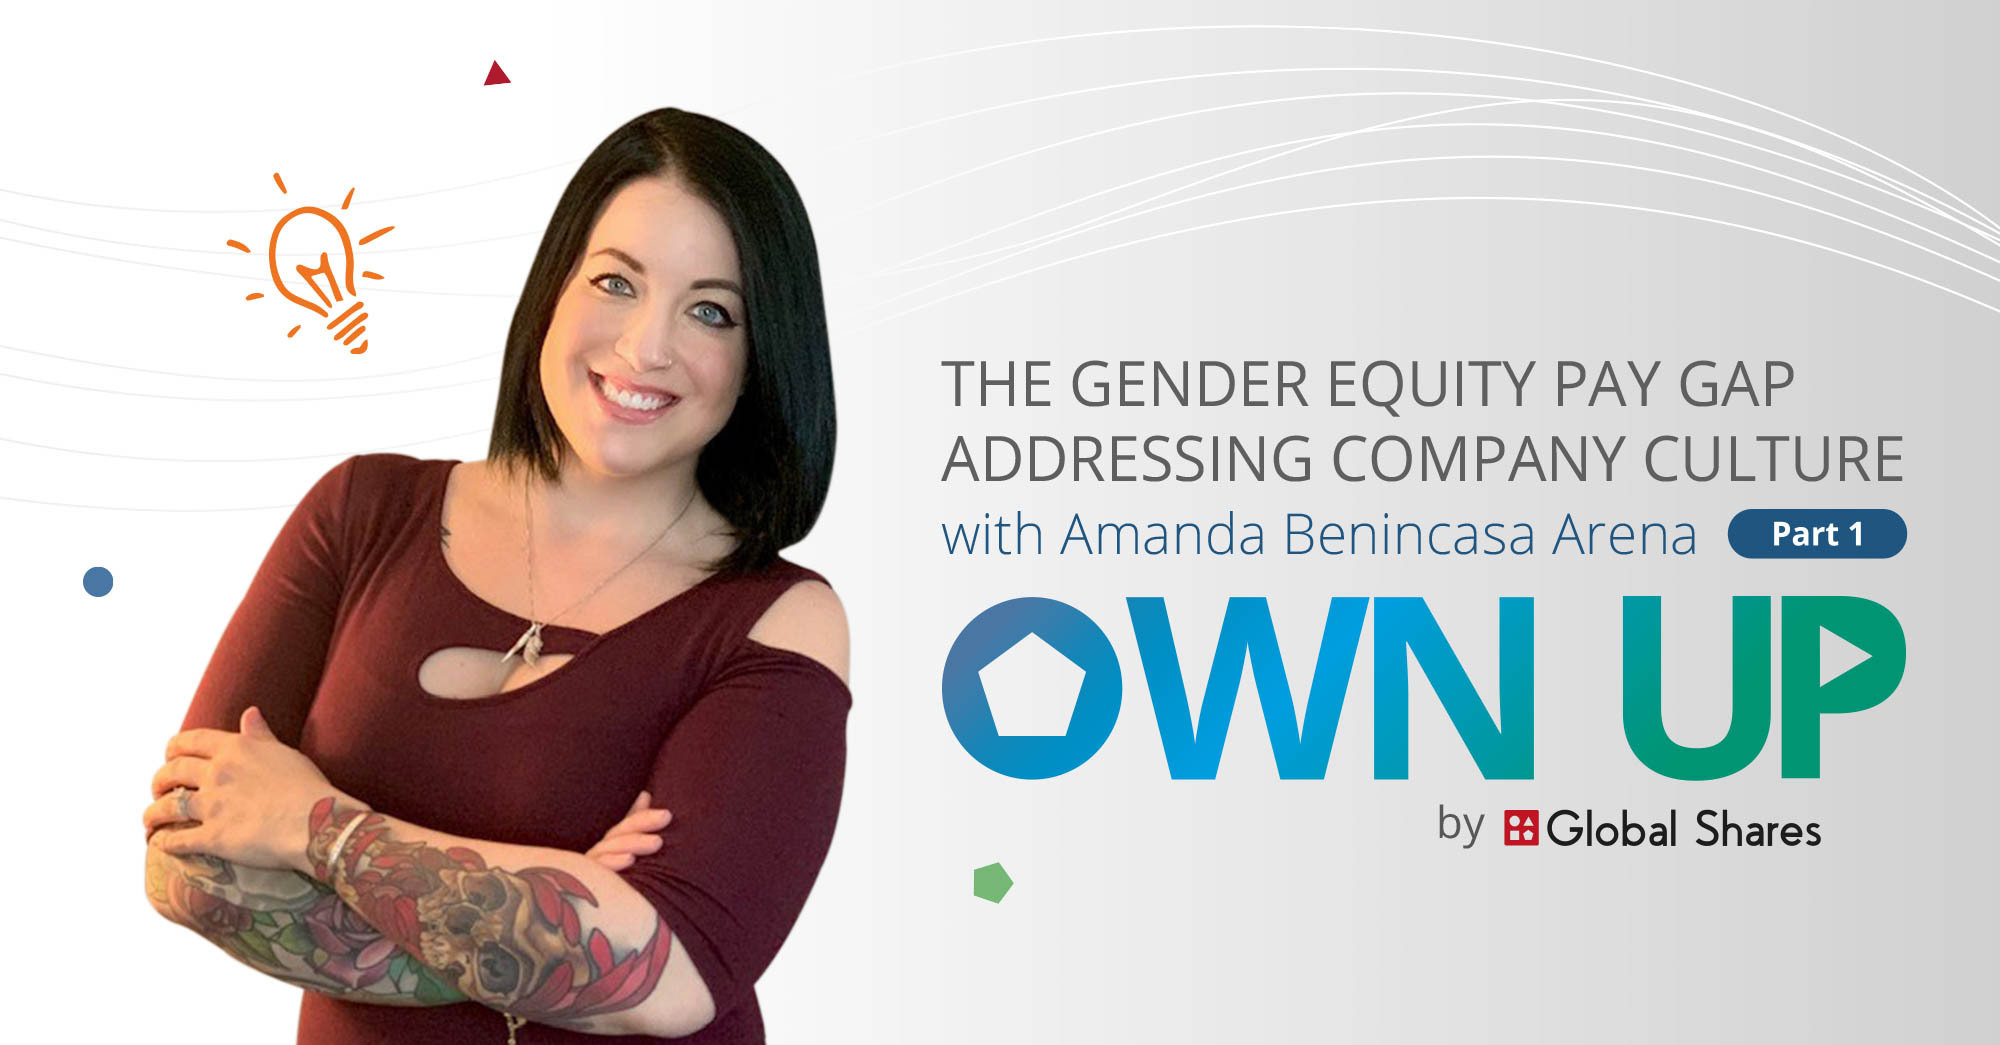 Own Up Podcast: The Gender Equity Pay Gap with Amanda Benincasa Arena